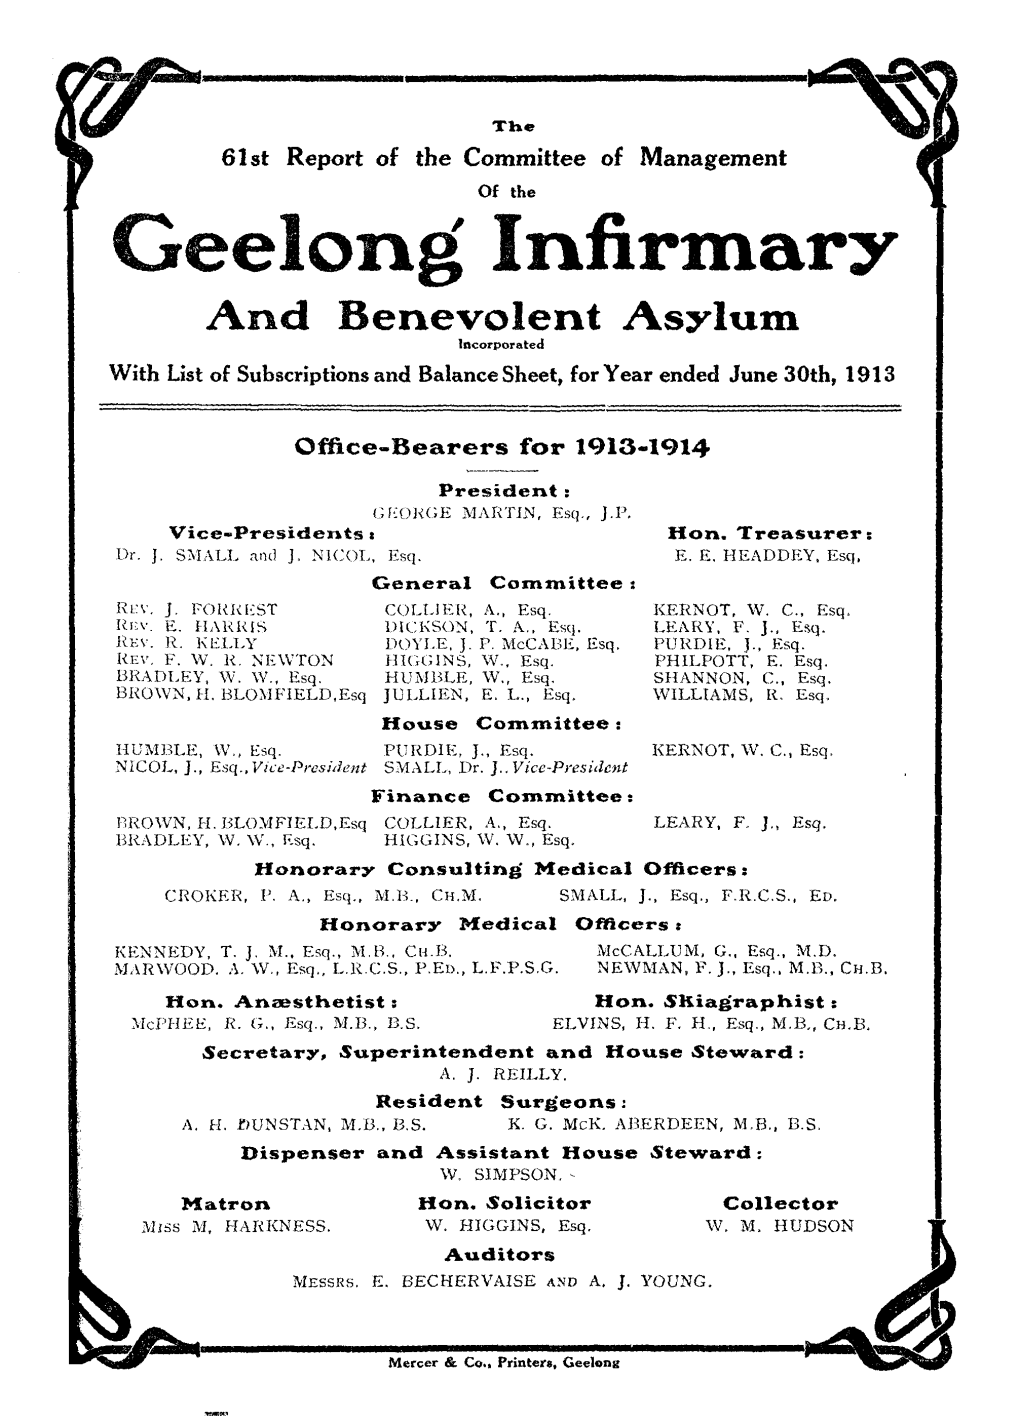 Geelong' Infirmary and Benevolent Asylum Incorporated with List of Subscriptions and Balance Sheet, for Year Ended June 30Th, 1913